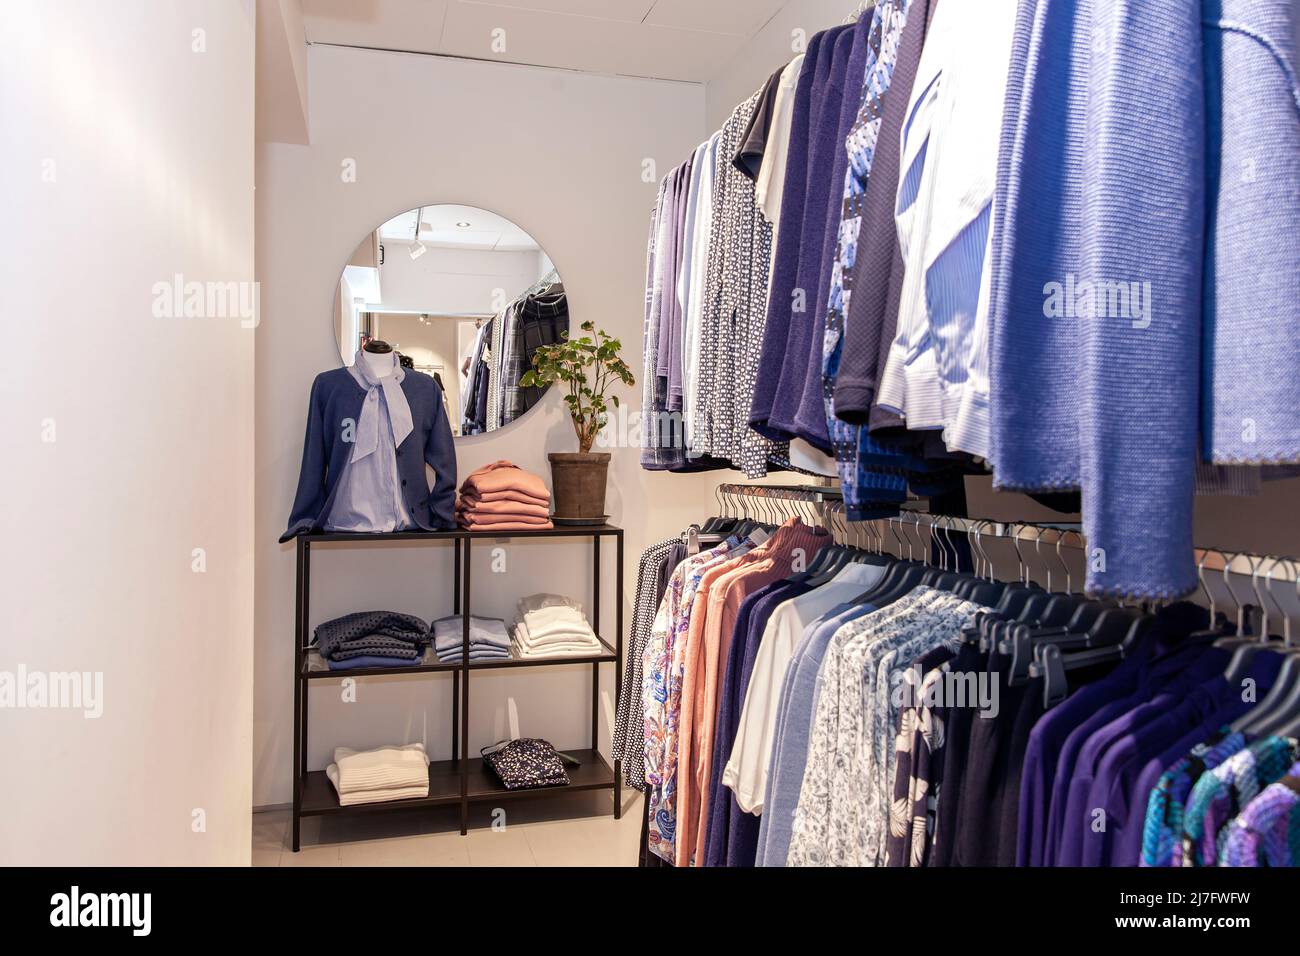 View of clothes shop interior Stock Photo